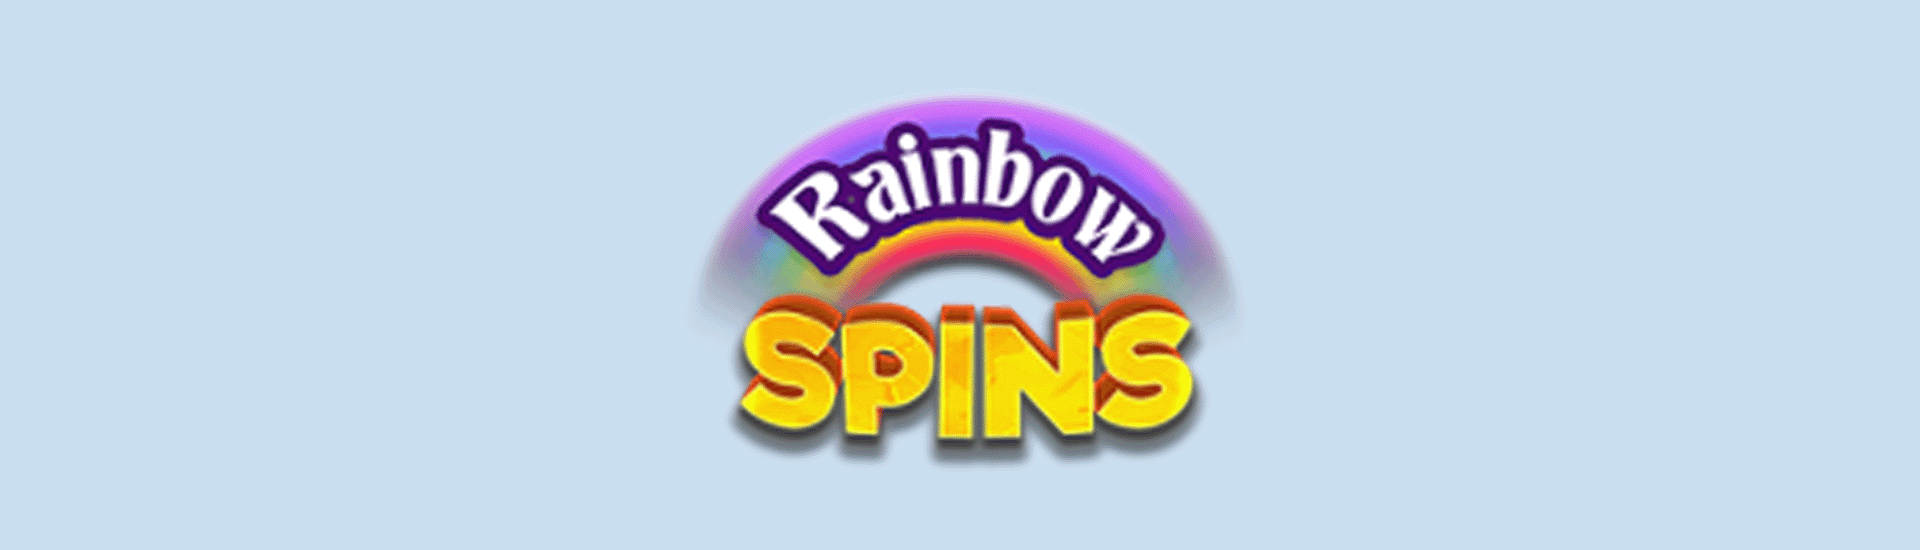 Rainbow Spins Featured Image